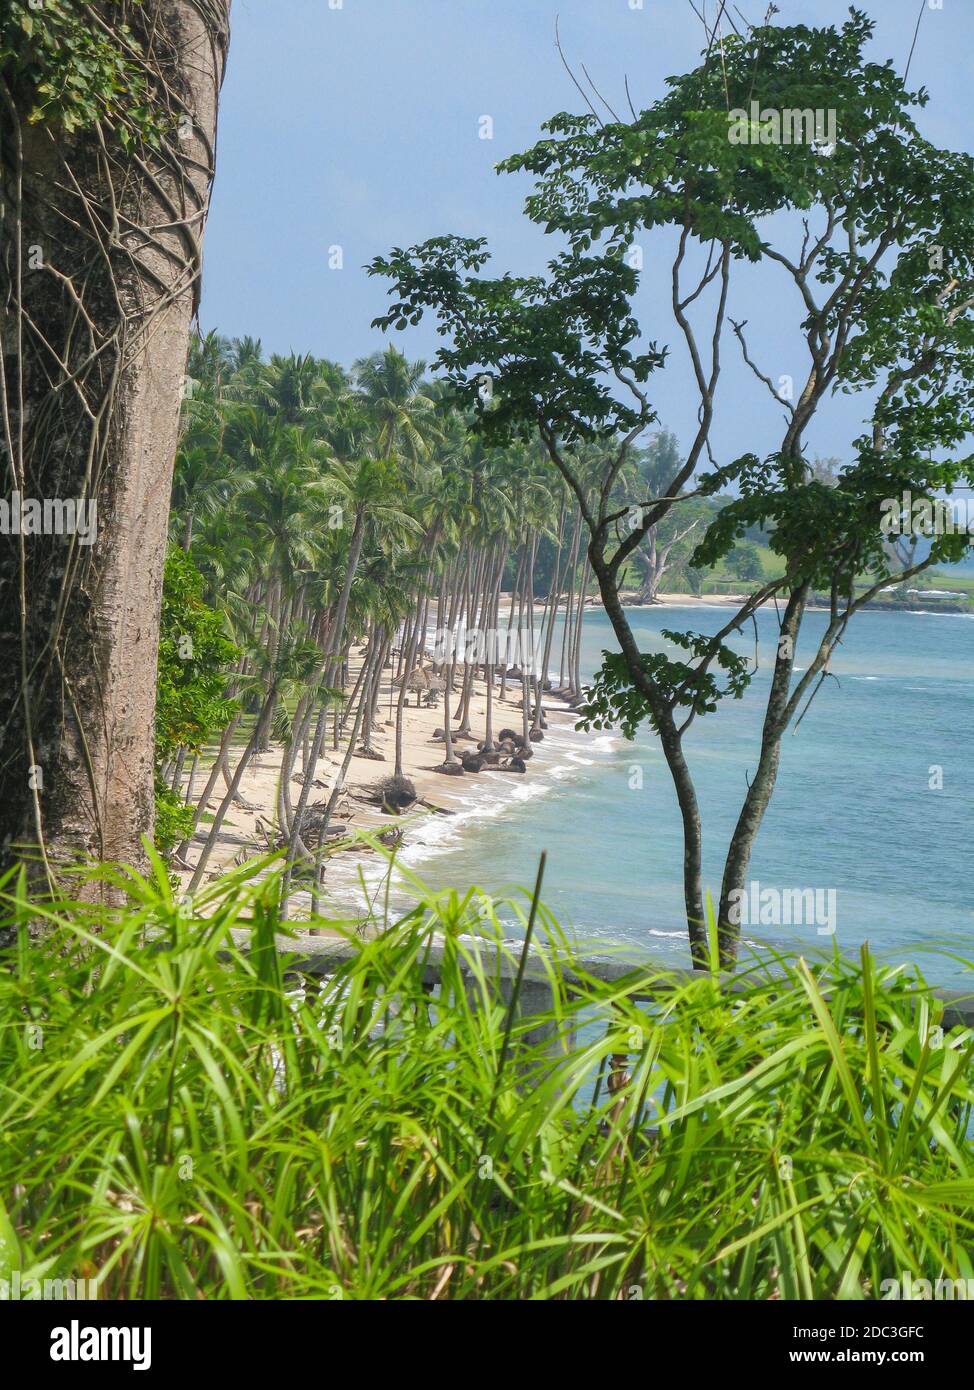 A view of the Beach with coconut trees and white sand at Port Blair in Andaman and Nicobar Islands Stock Photo